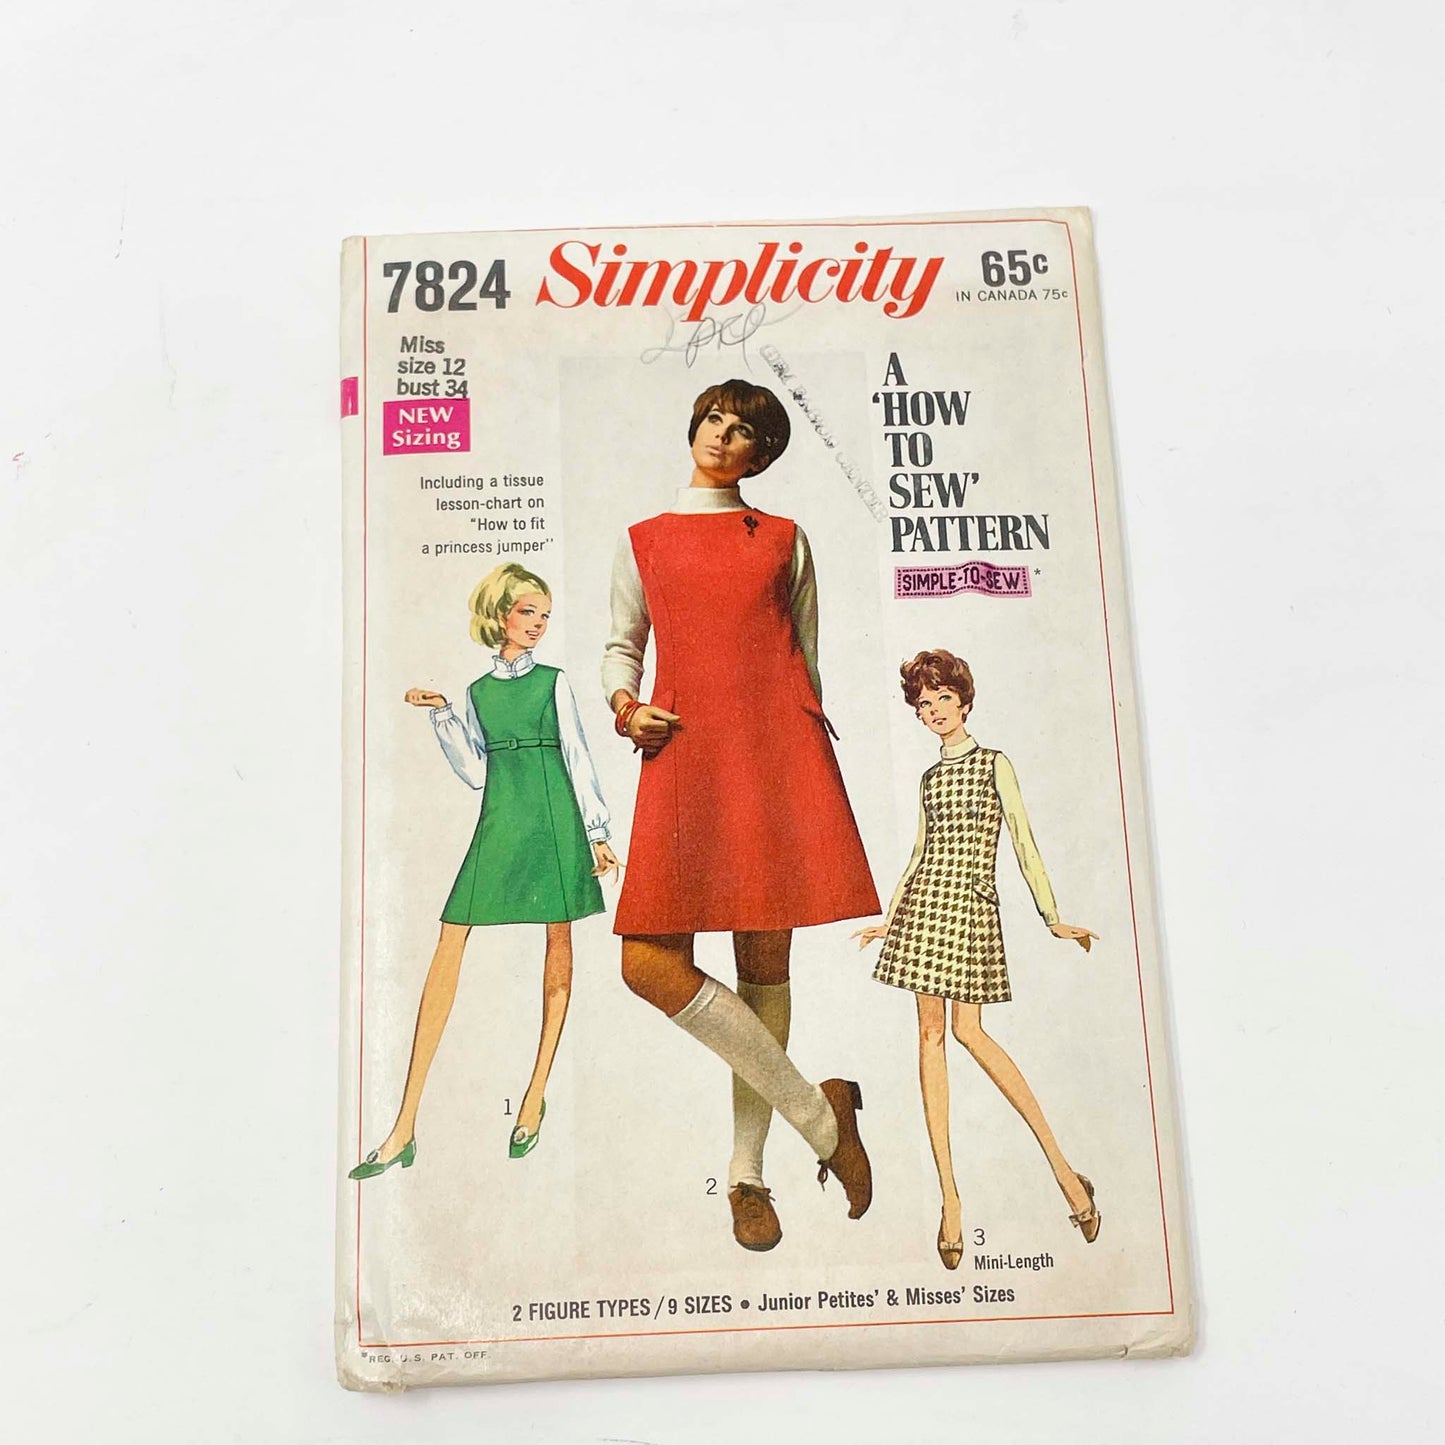 1960's Sewing Patterns